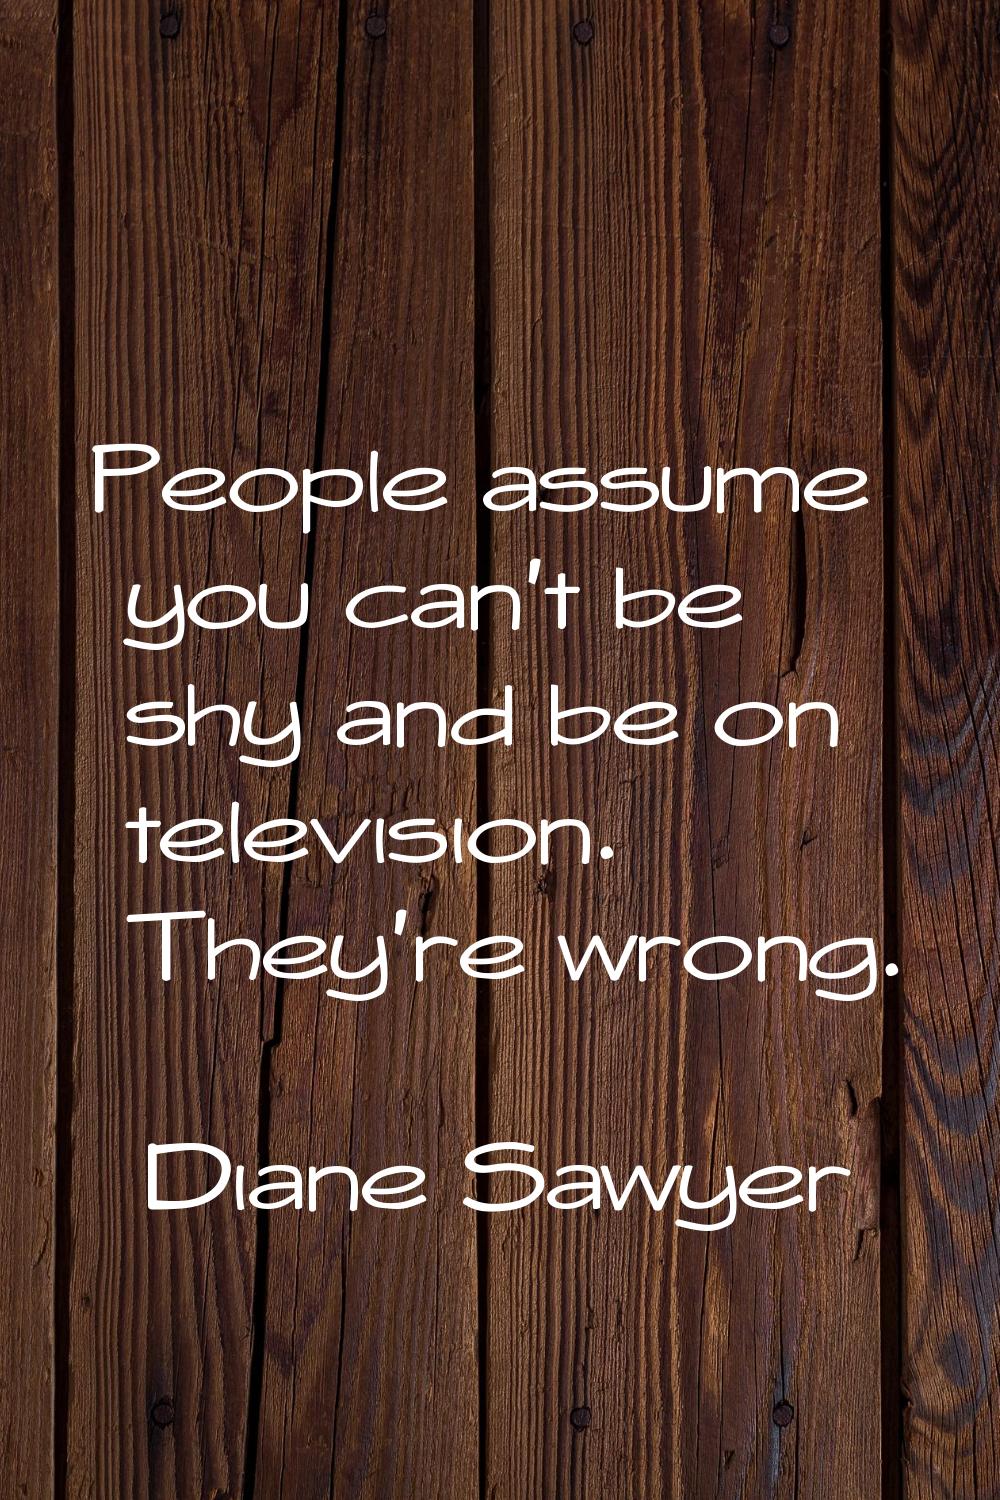 People assume you can't be shy and be on television. They're wrong.